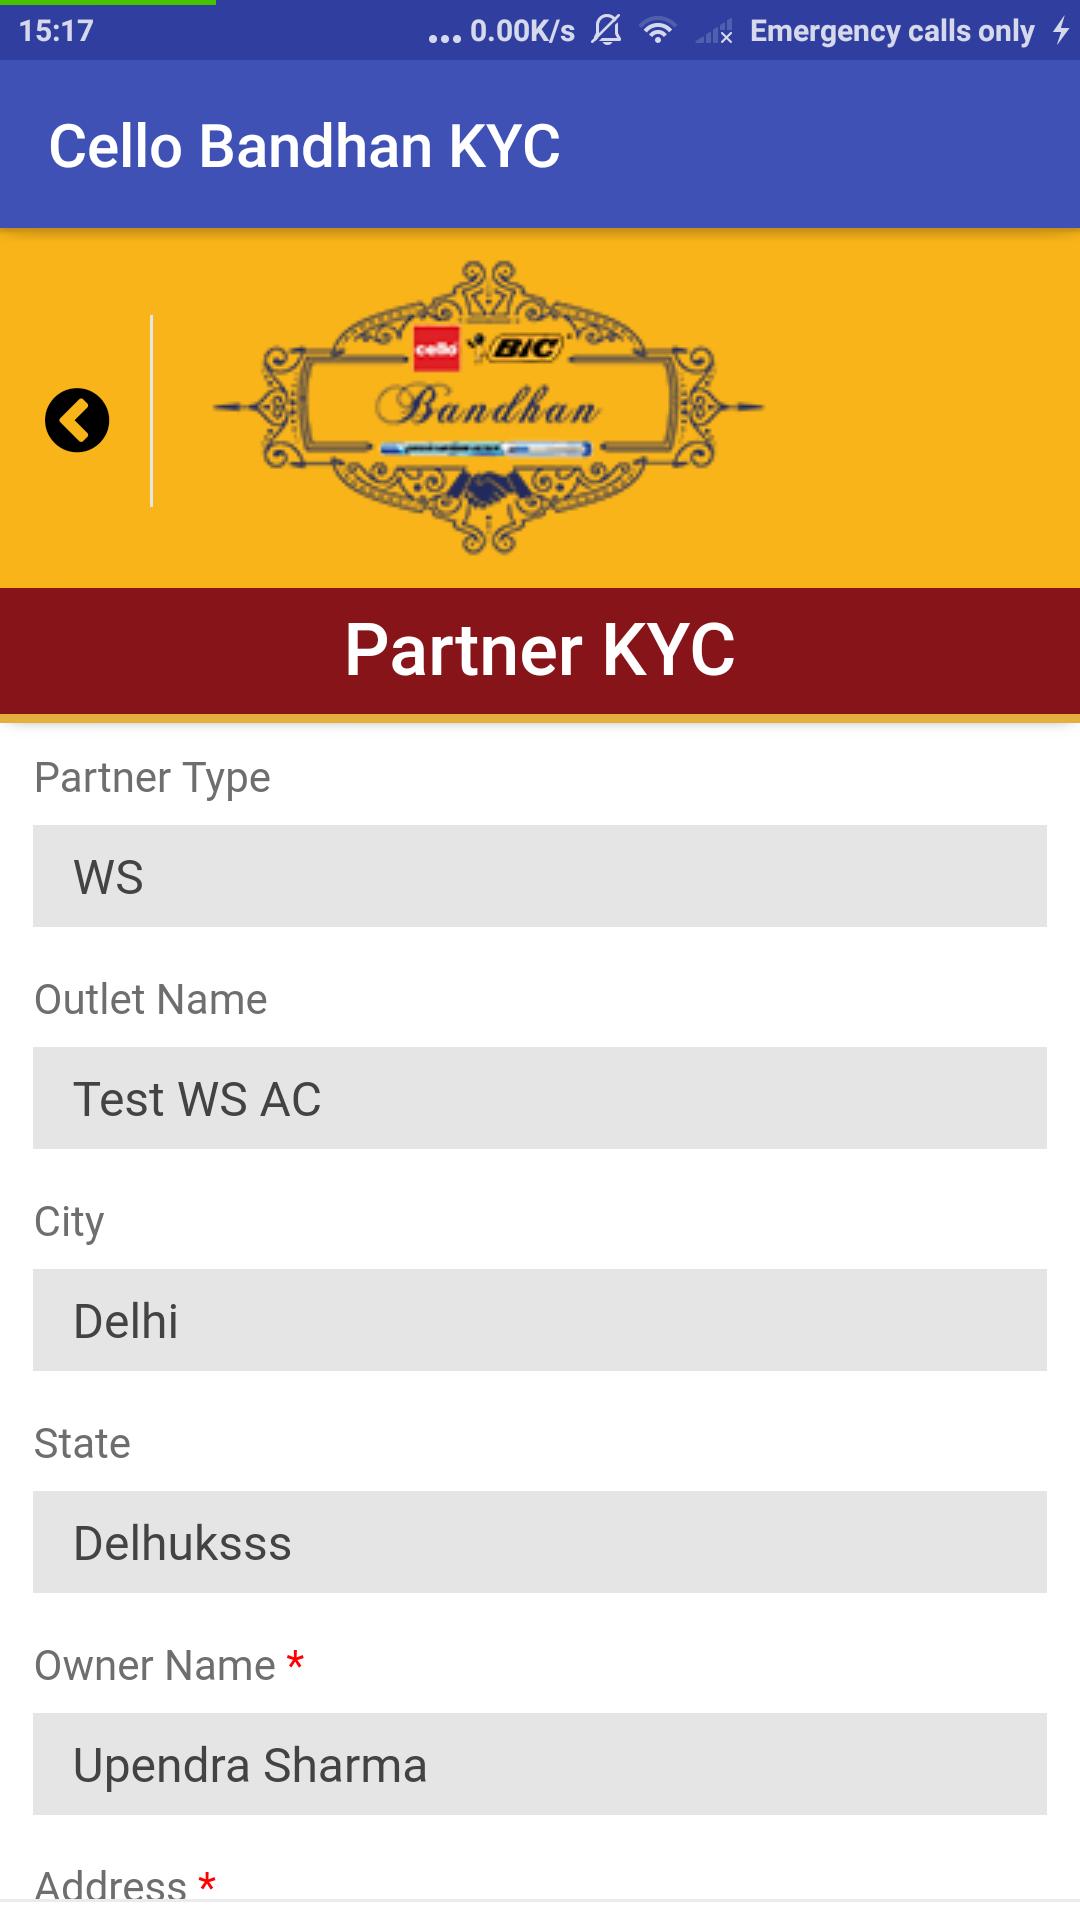 BIC Cello Bandhan KYC for Android - APK Download